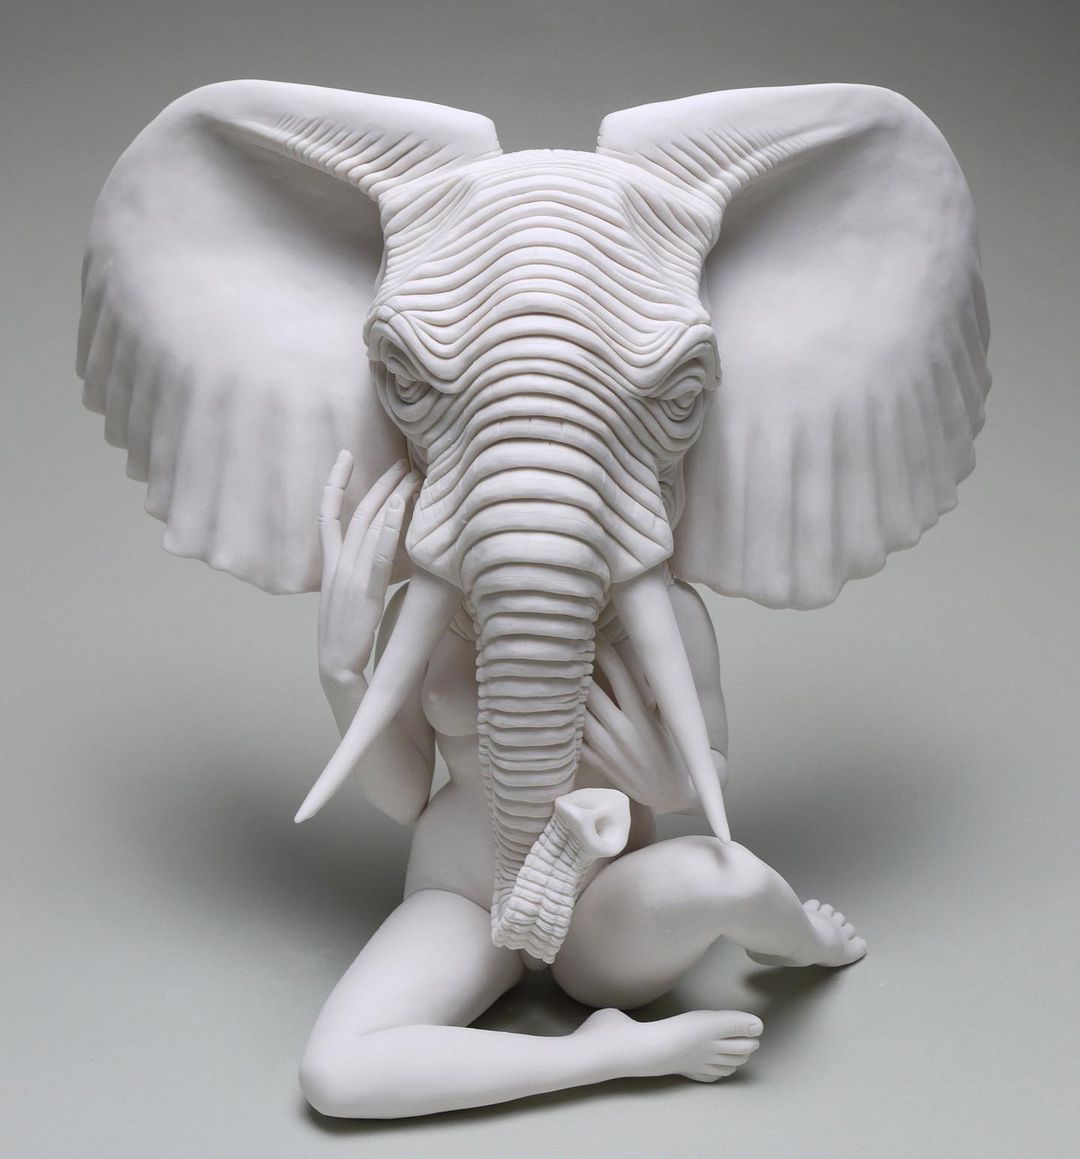 Fabulous Sculptures Of Human Animal Hybrids By Crystal Morey 6